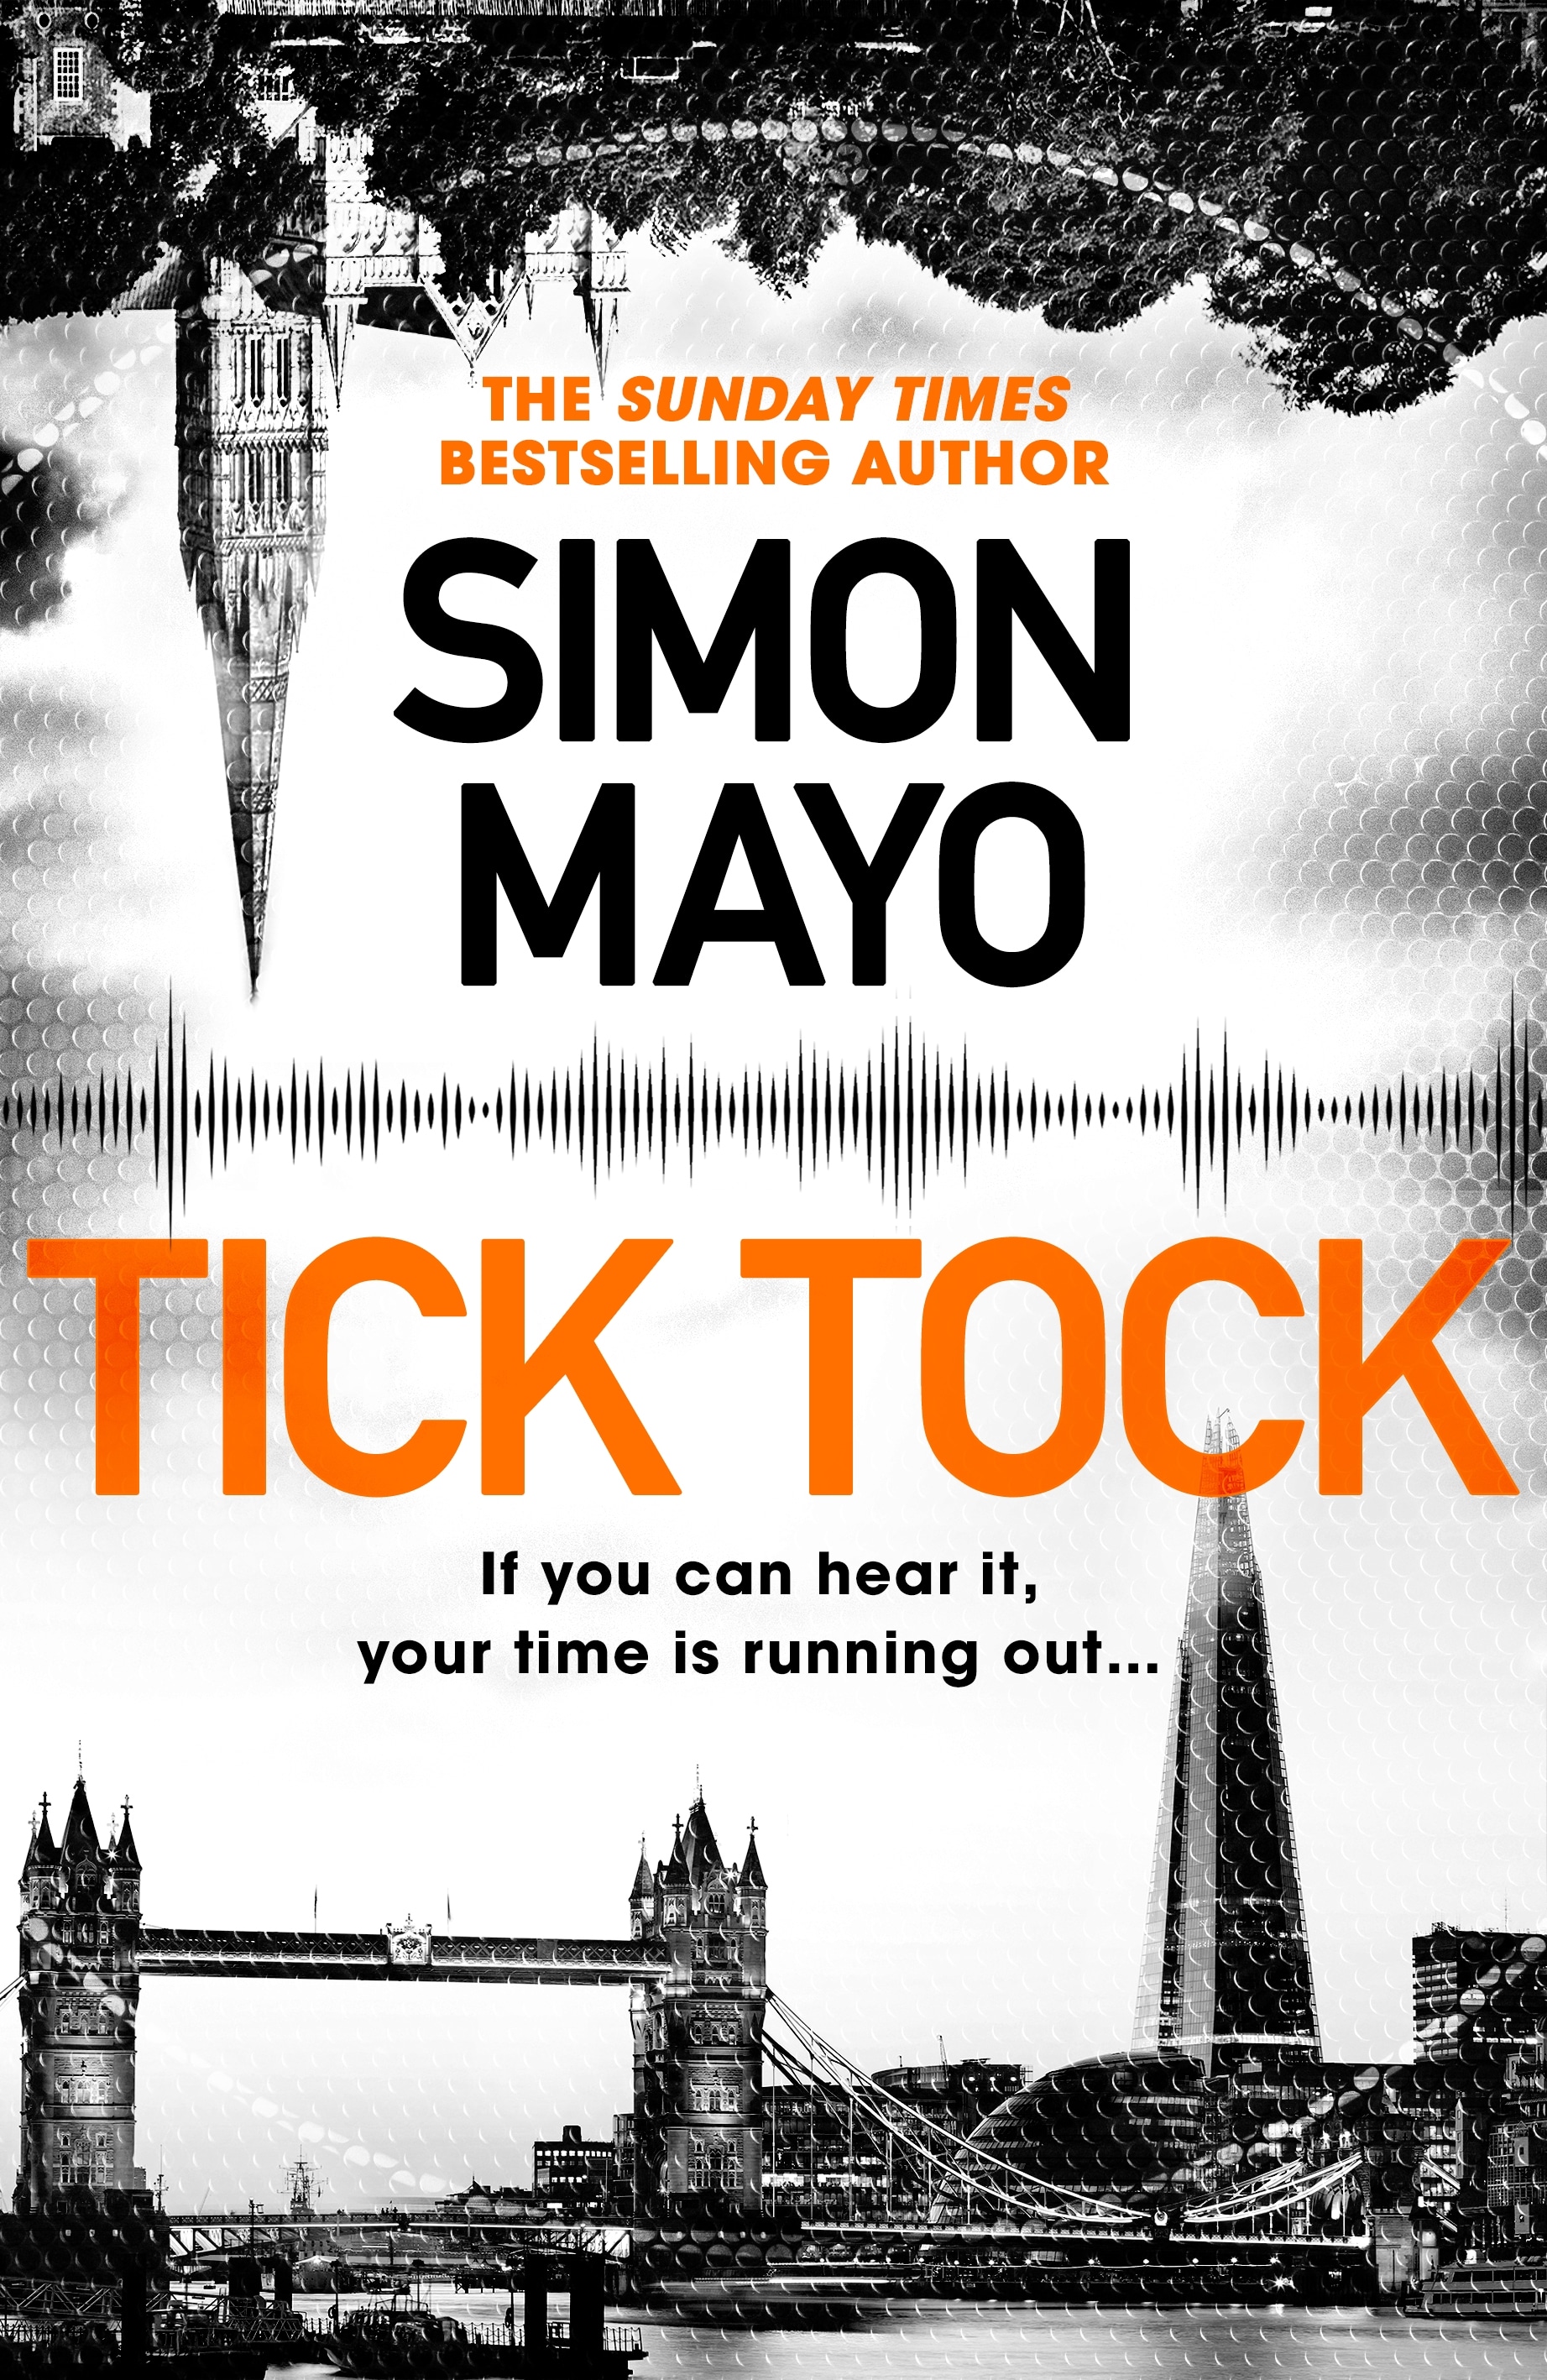 Book “Tick Tock” by Simon Mayo — August 18, 2022